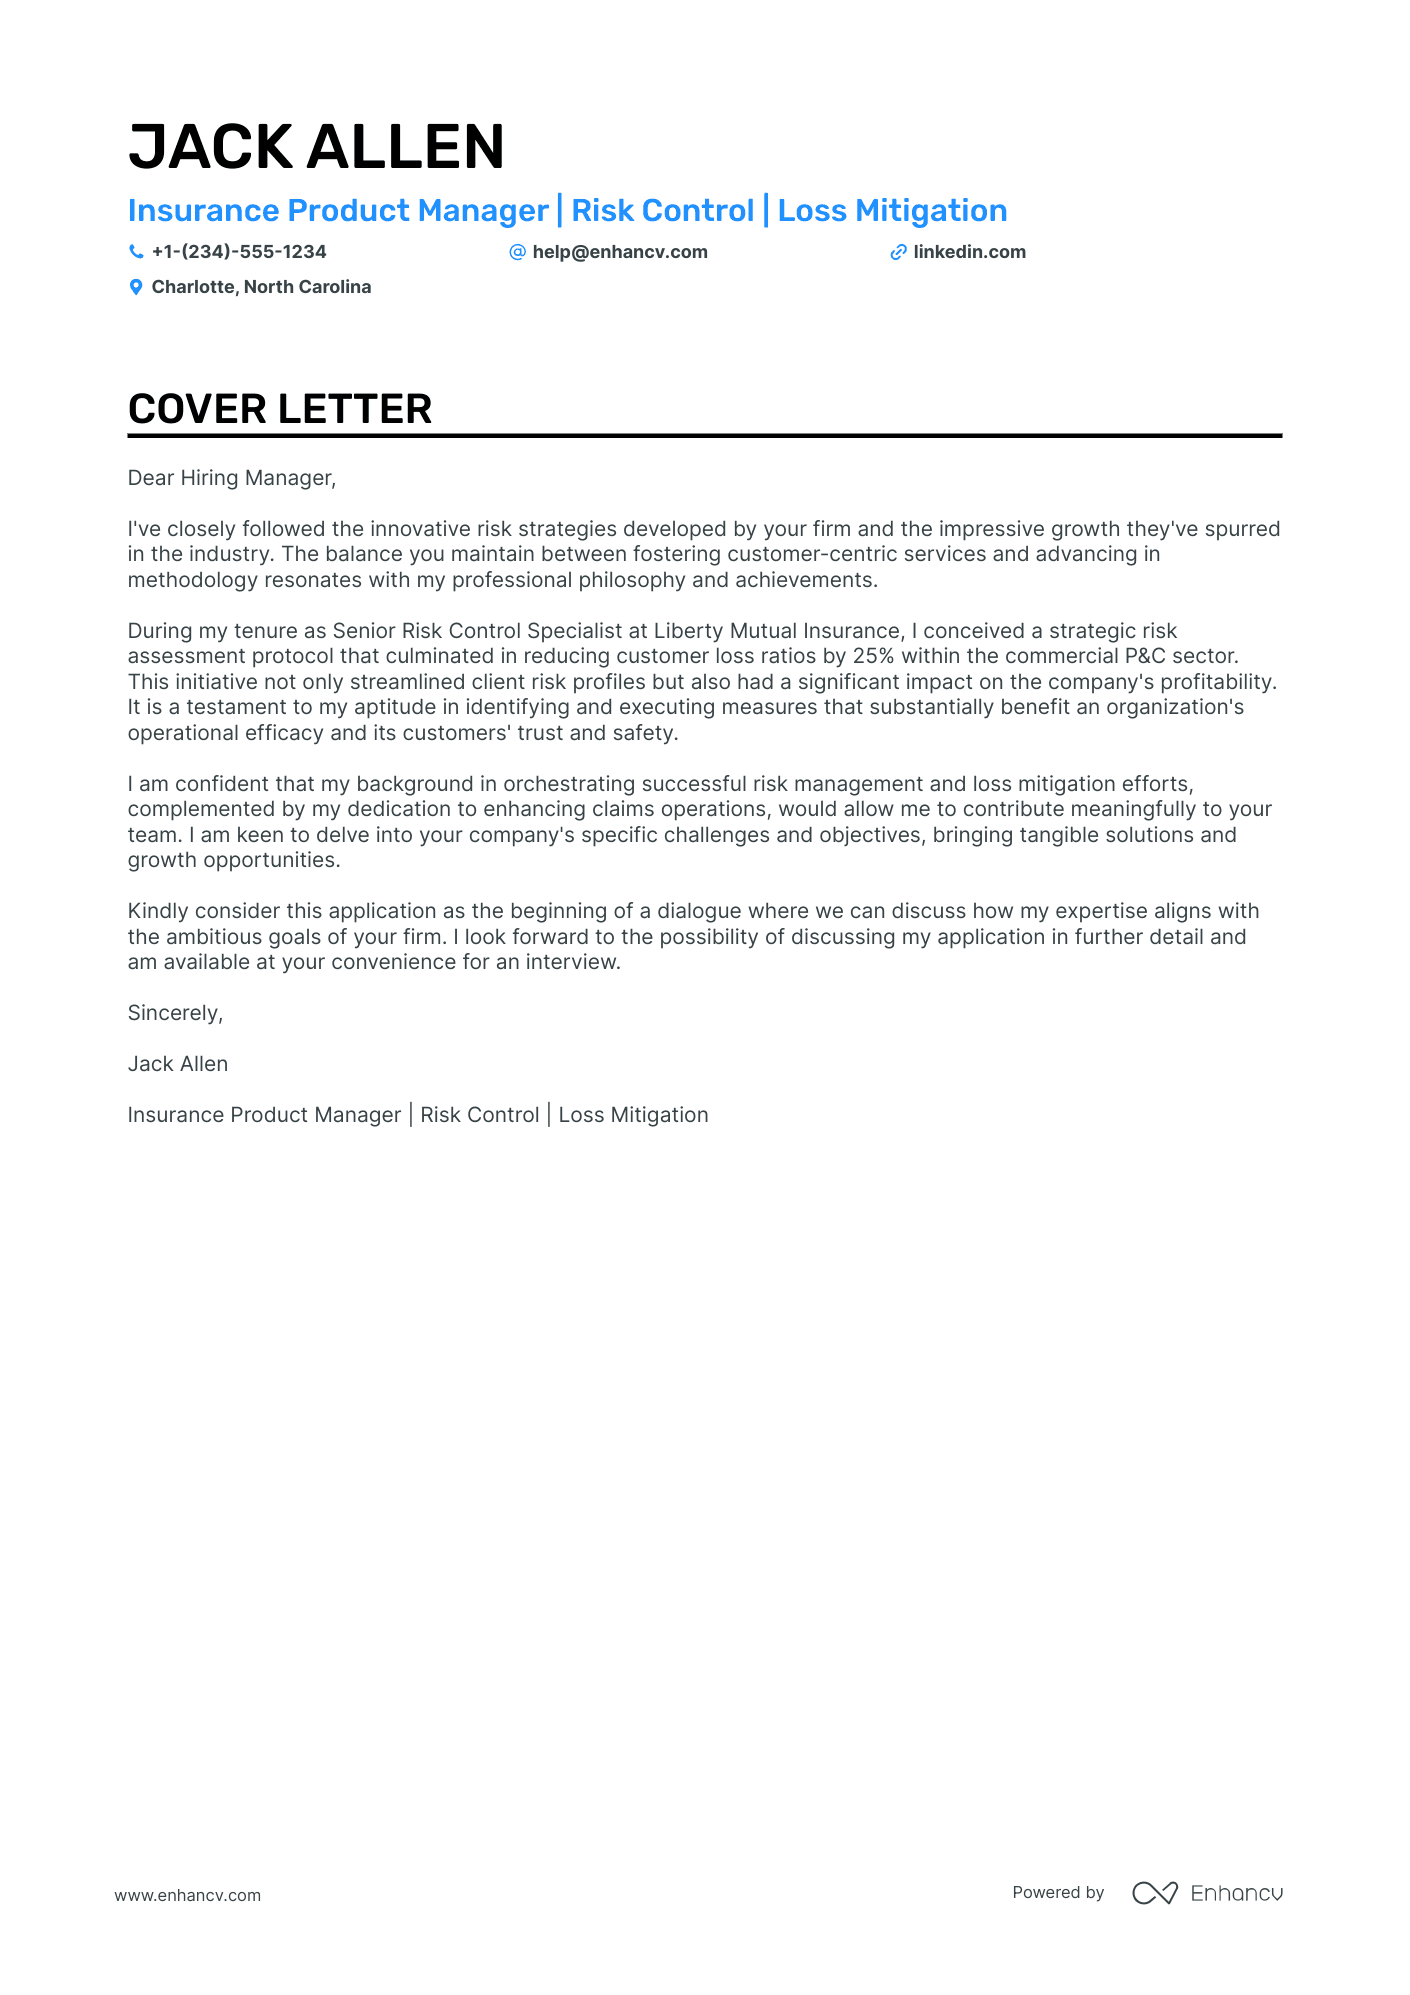 Insurance Product Manager cover letter